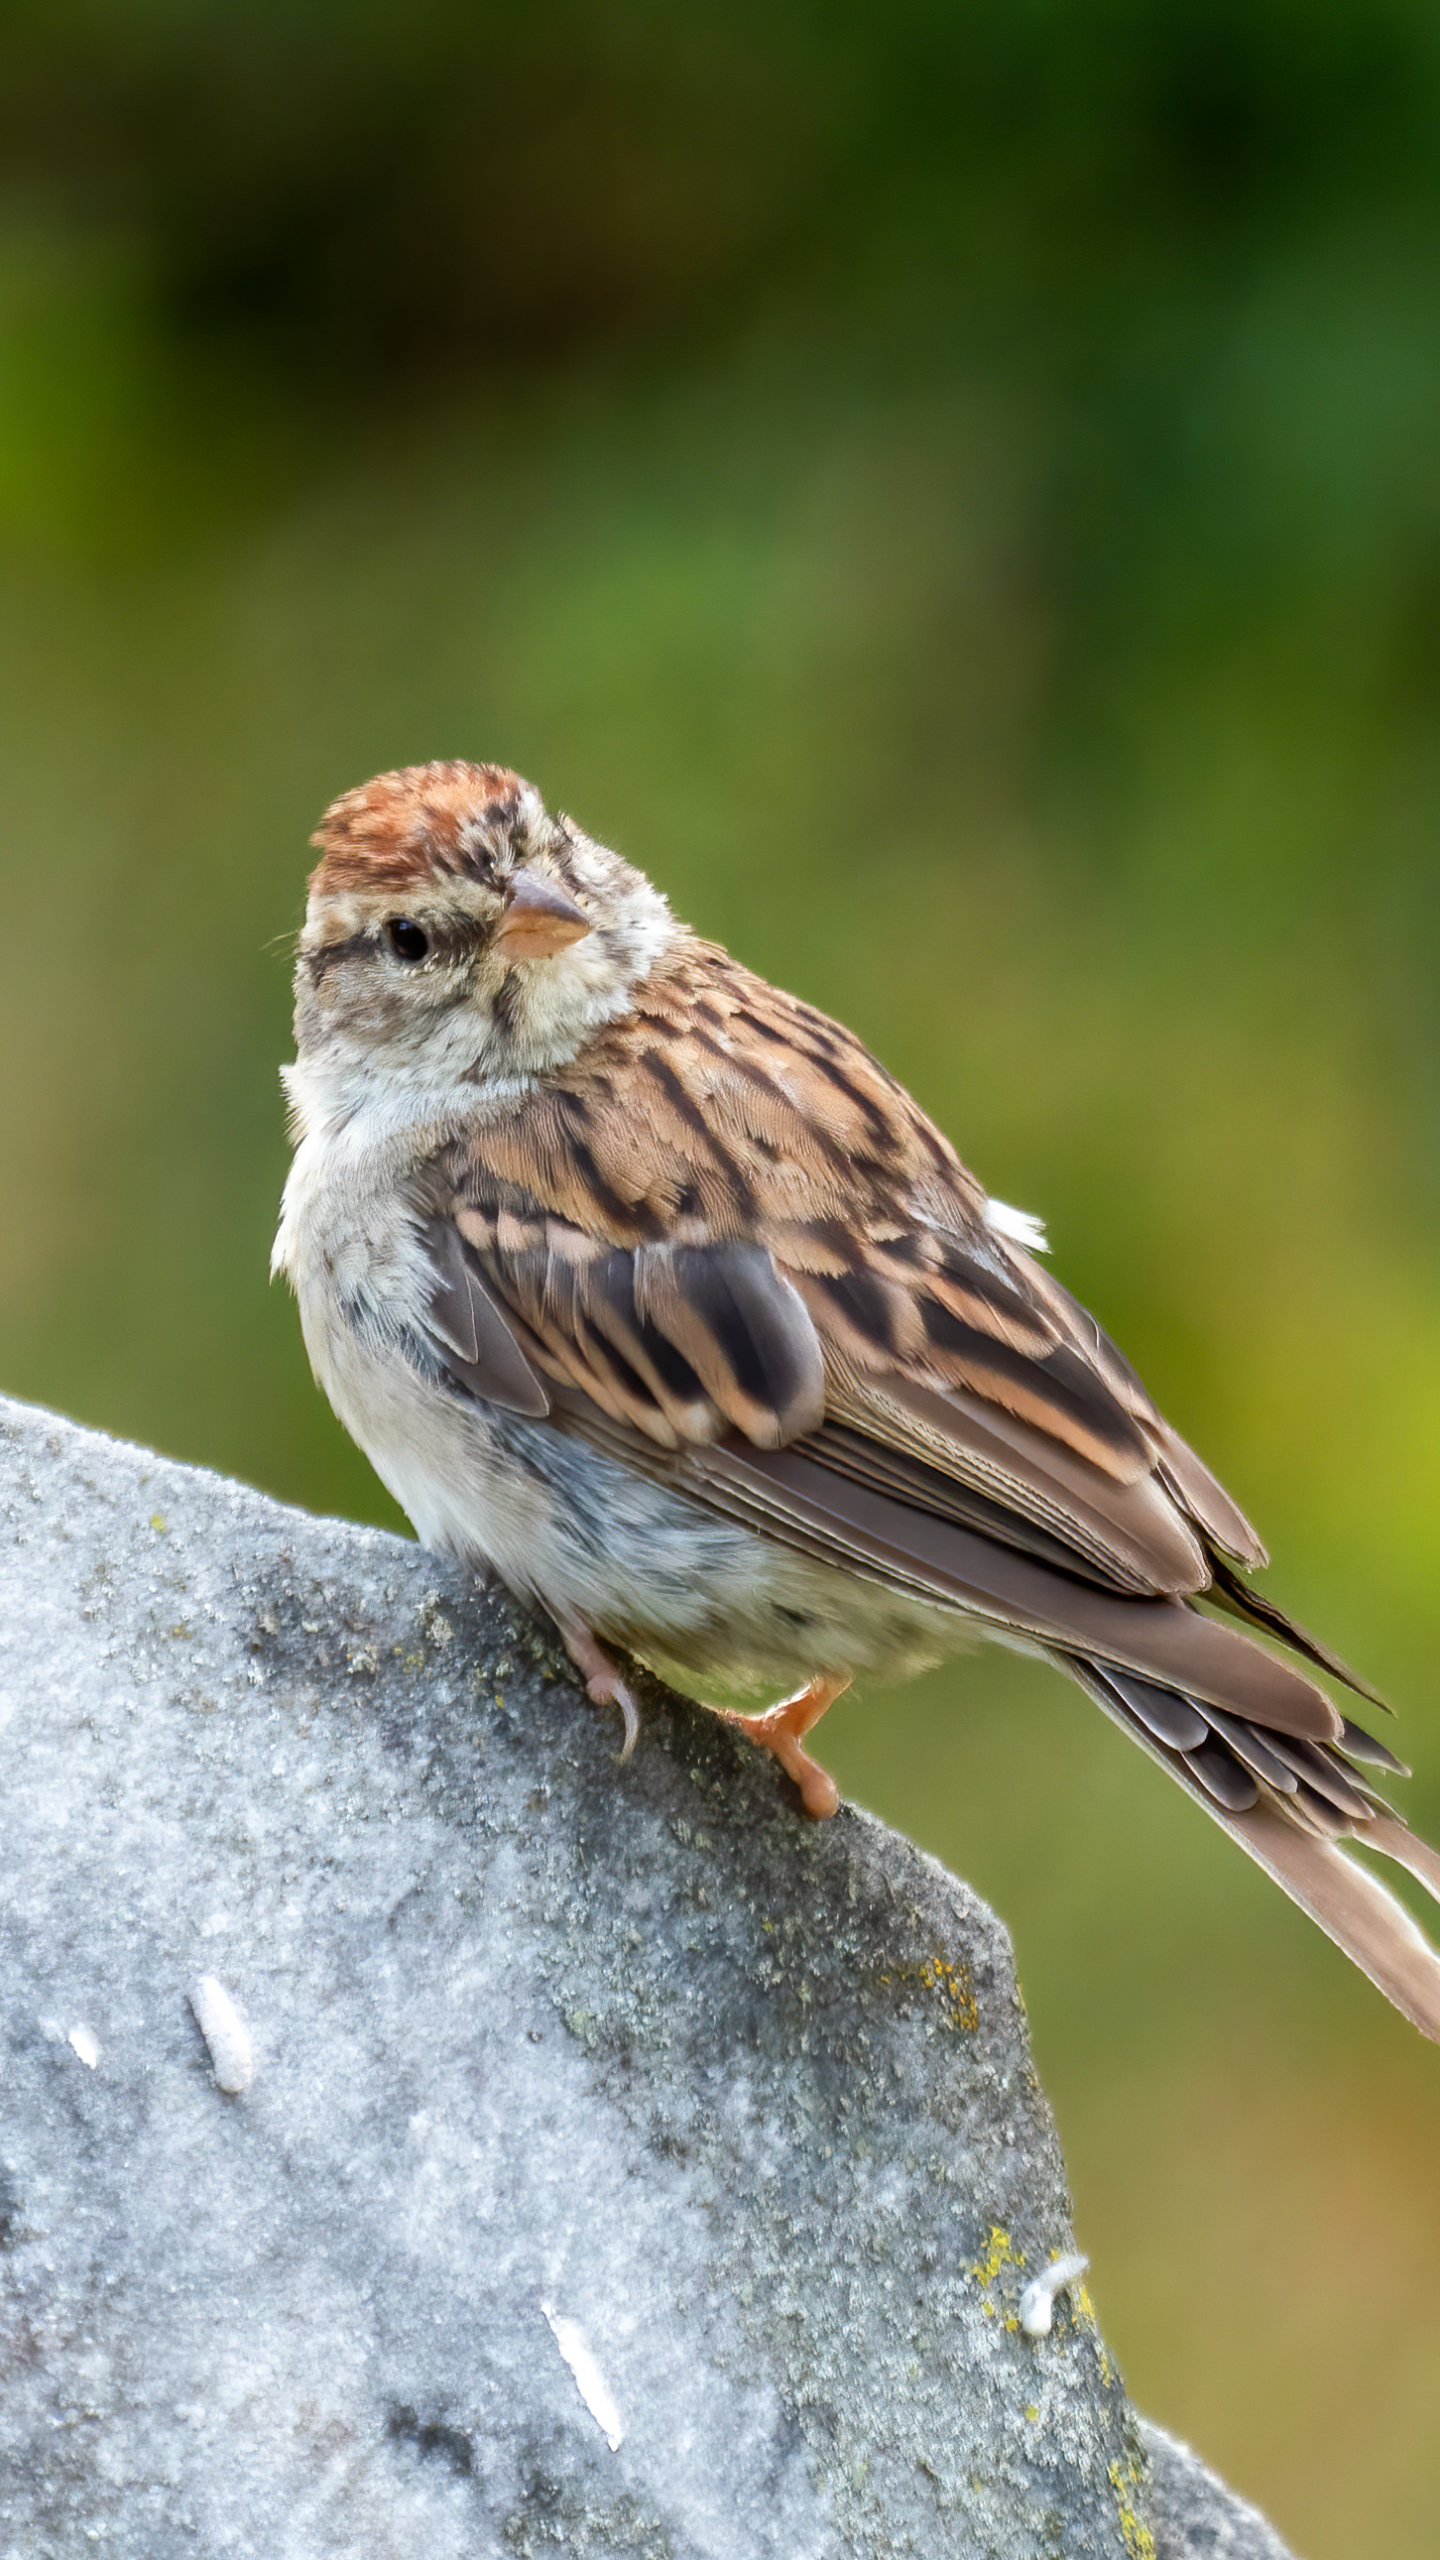 Chipping sparrow in Green-Wood Cemetery - Brooklyn, NY, USA by Rhododendrites